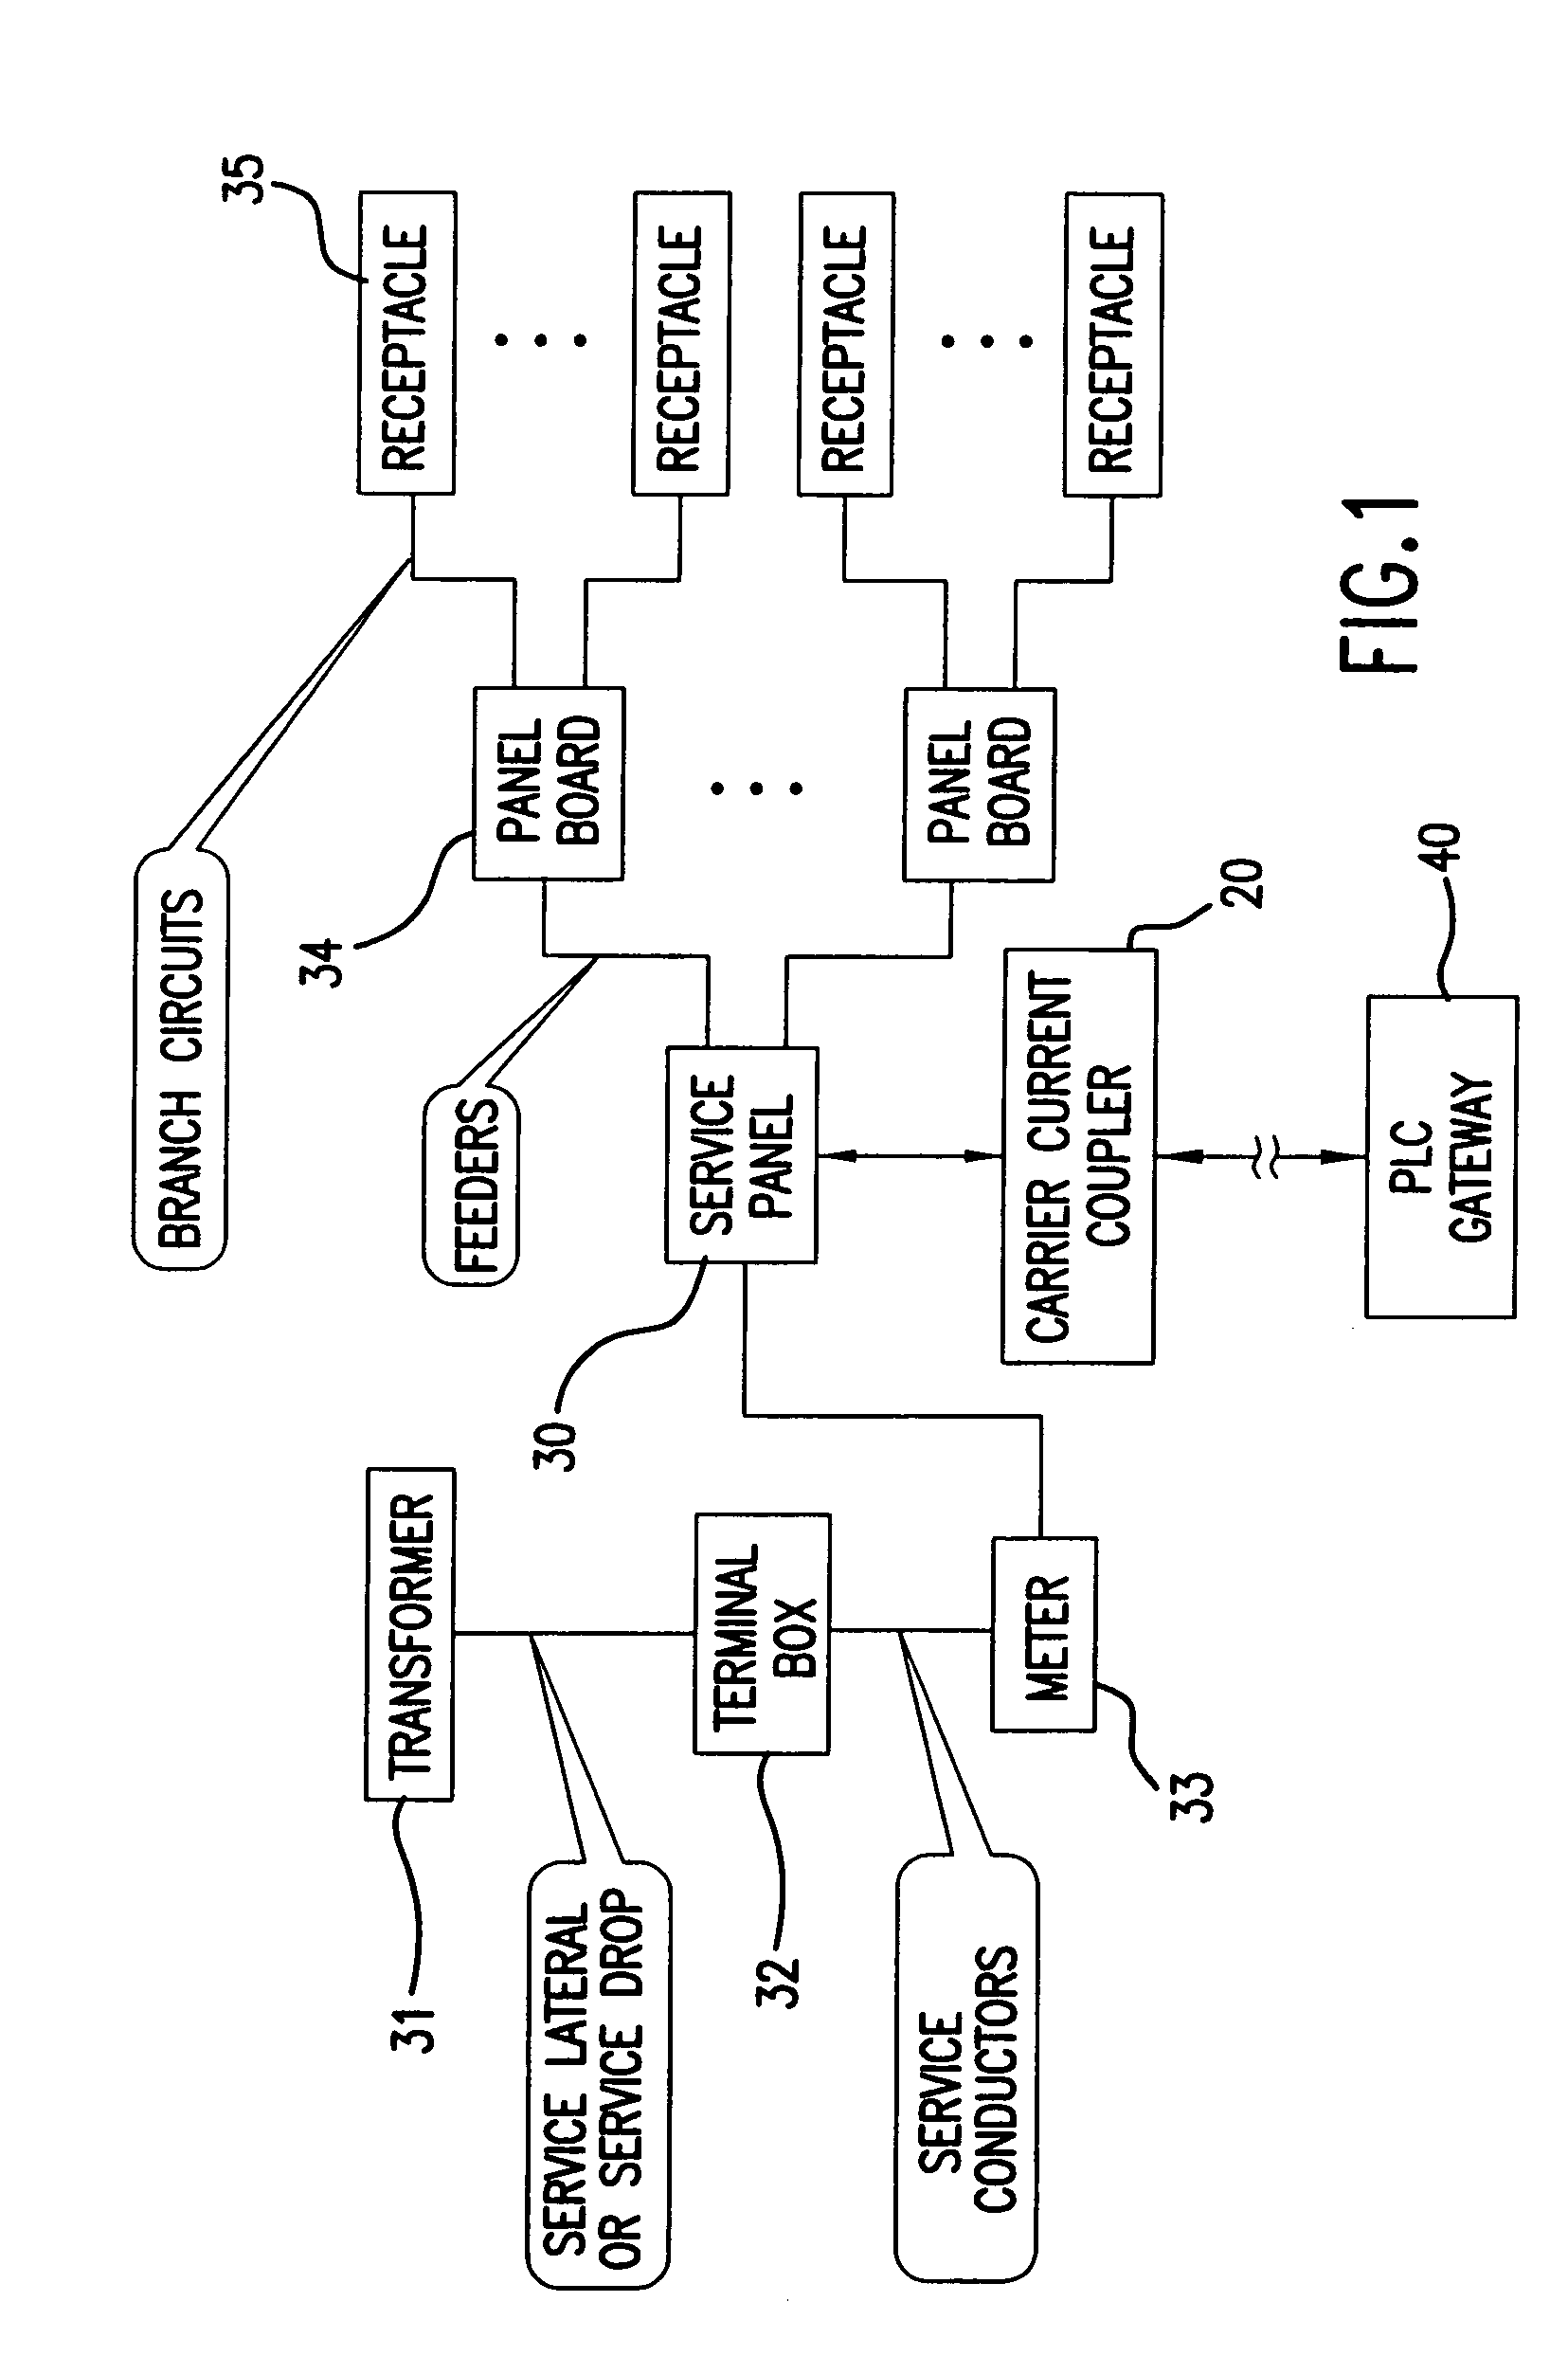 Method and apparatus for attaching power line communications to customer premises